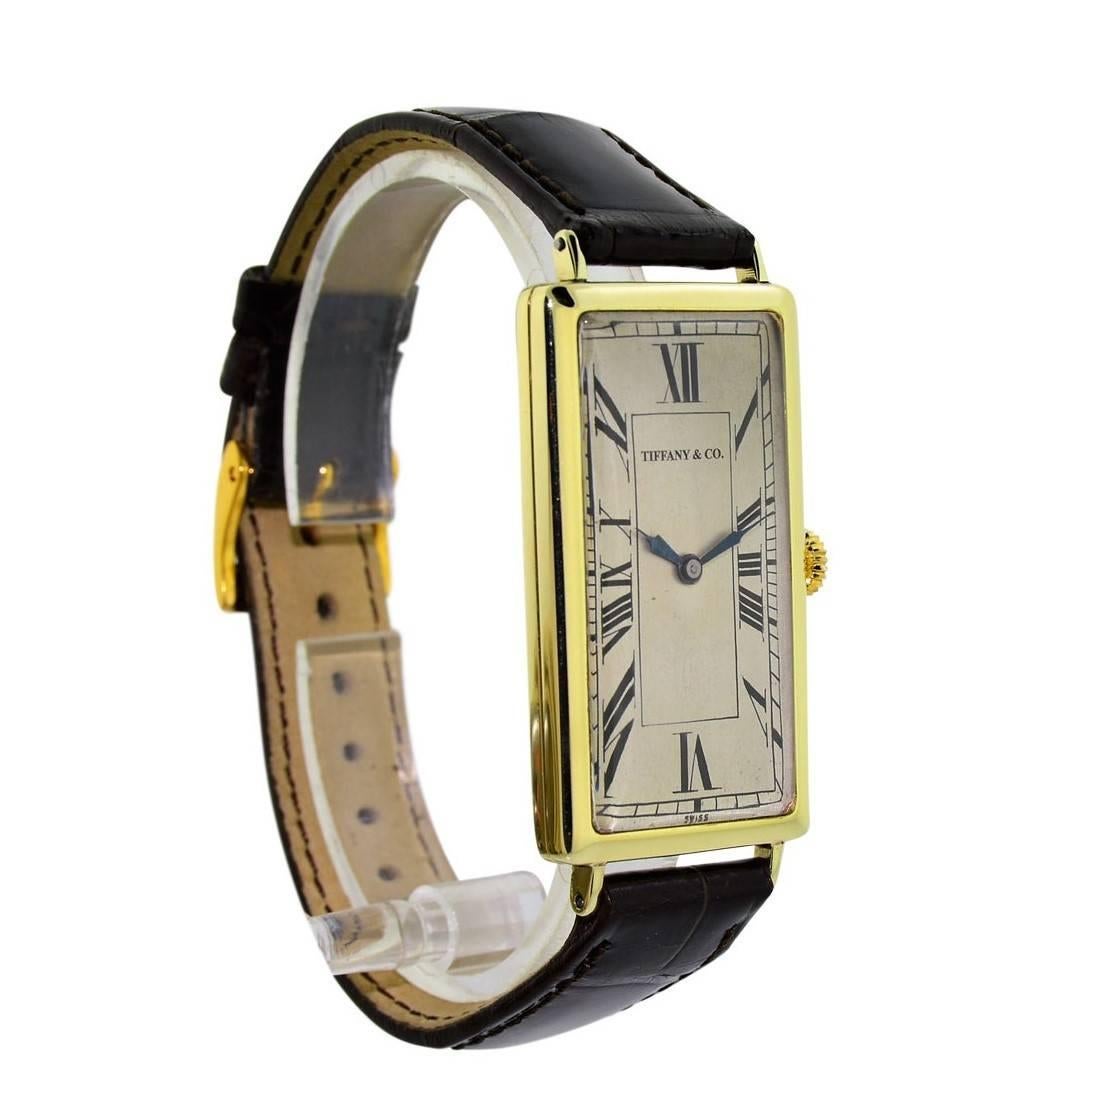 FACTORY / HOUSE: Tiffany and Co. New York
STYLE / REFERENCE: Rectangle /  Art Deco
METAL / MATERIAL:  14 Kt Solid Yellow Gold
CIRCA: 1929
MOVEMENT / CALIBER: Manual Winding / 15 Jewels / cal. 10.86 N
DIAL / HANDS: Original with Kiln Fired Enamel